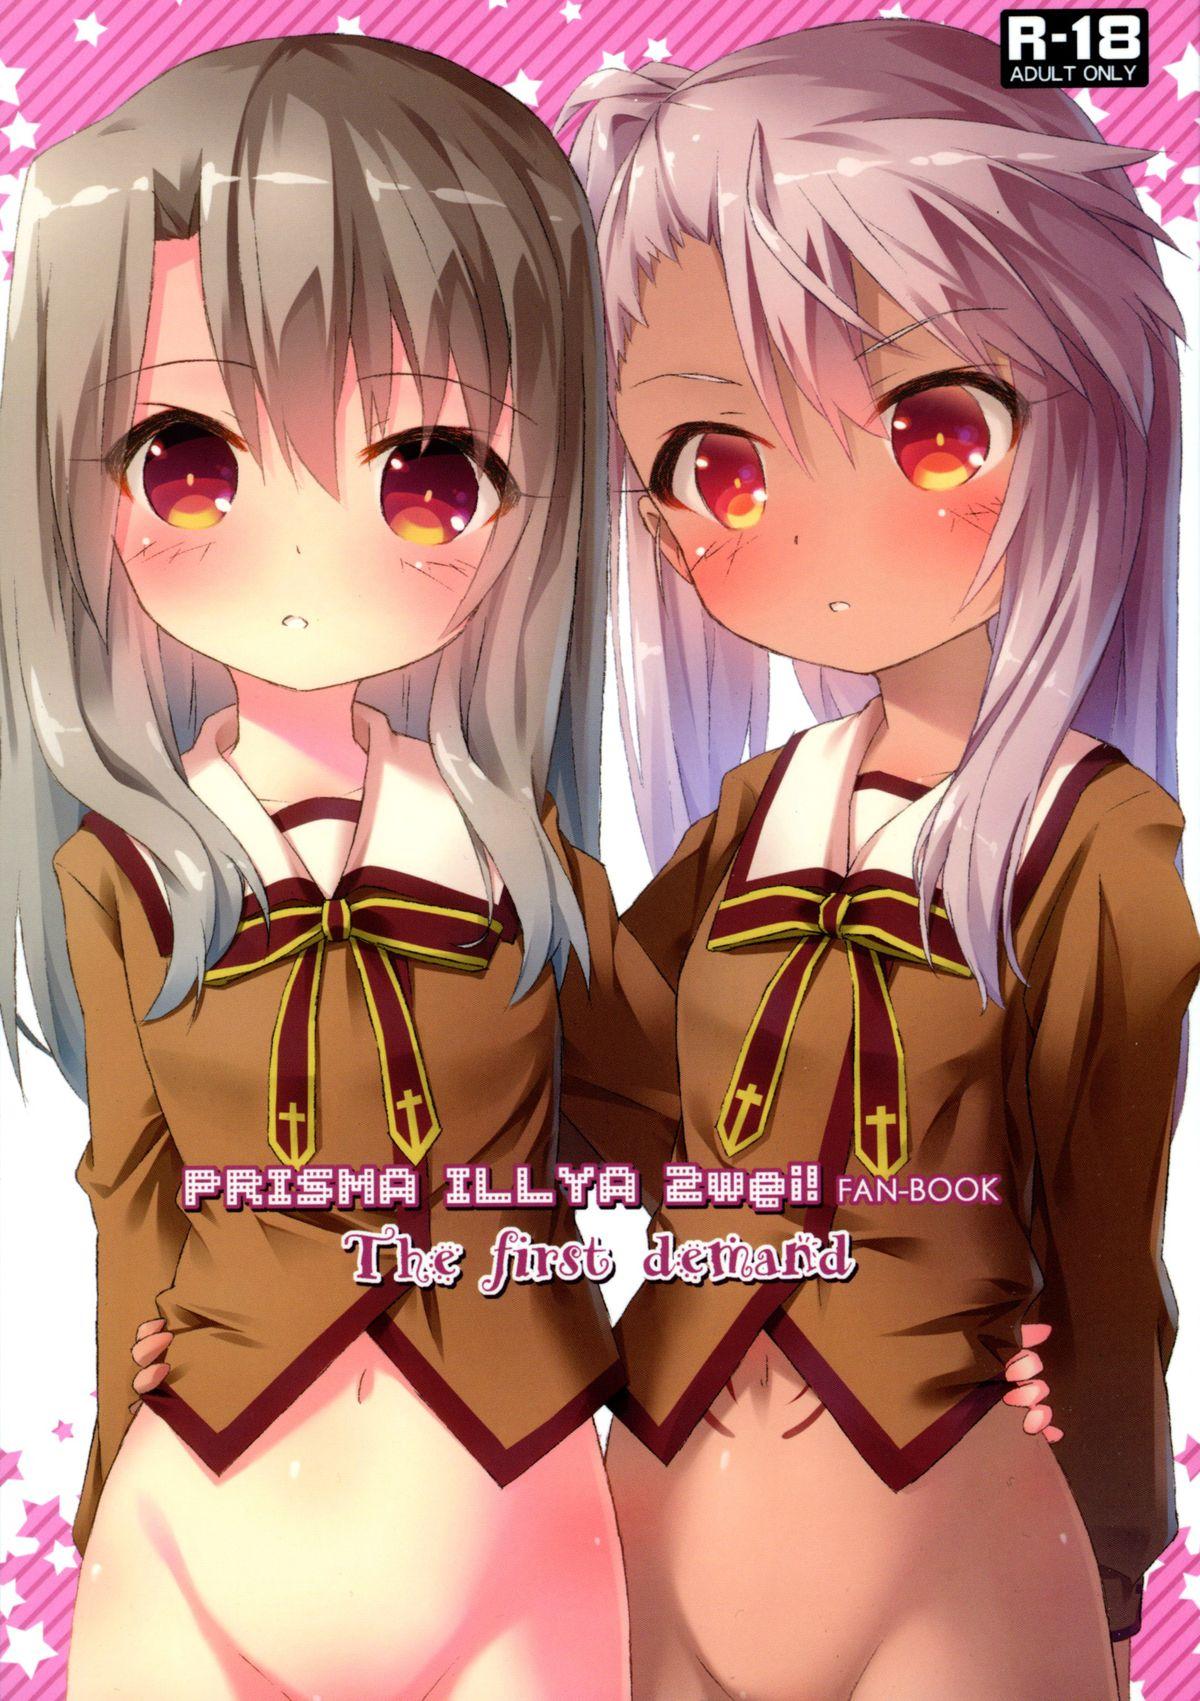 Girlongirl The first demand - Fate kaleid liner prisma illya Boob - Page 2